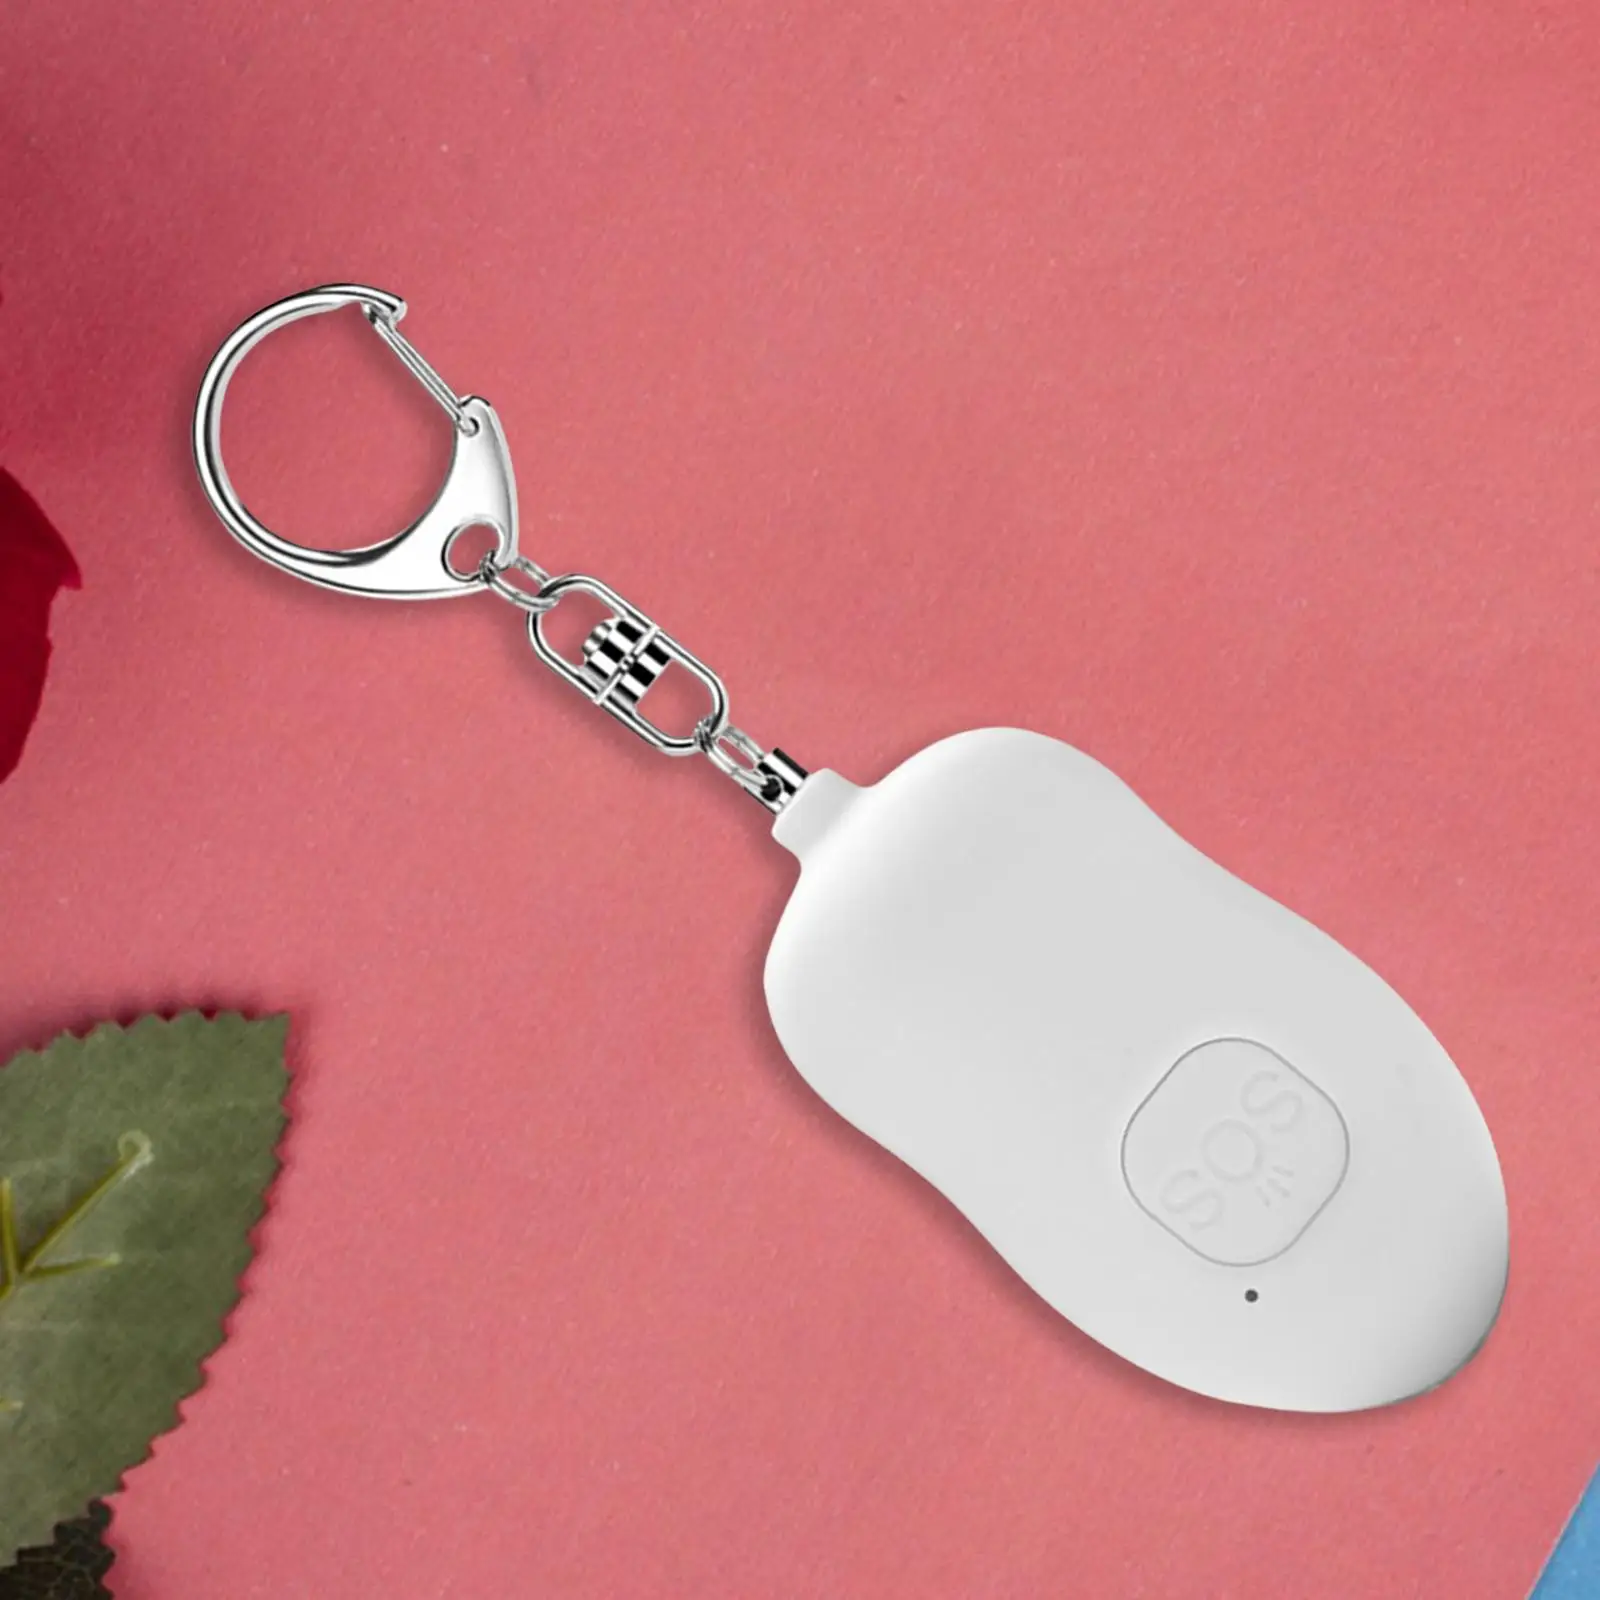 Security Alarm Keychain Quick Charging Personal Alarm for Women Kids Girl Night Working